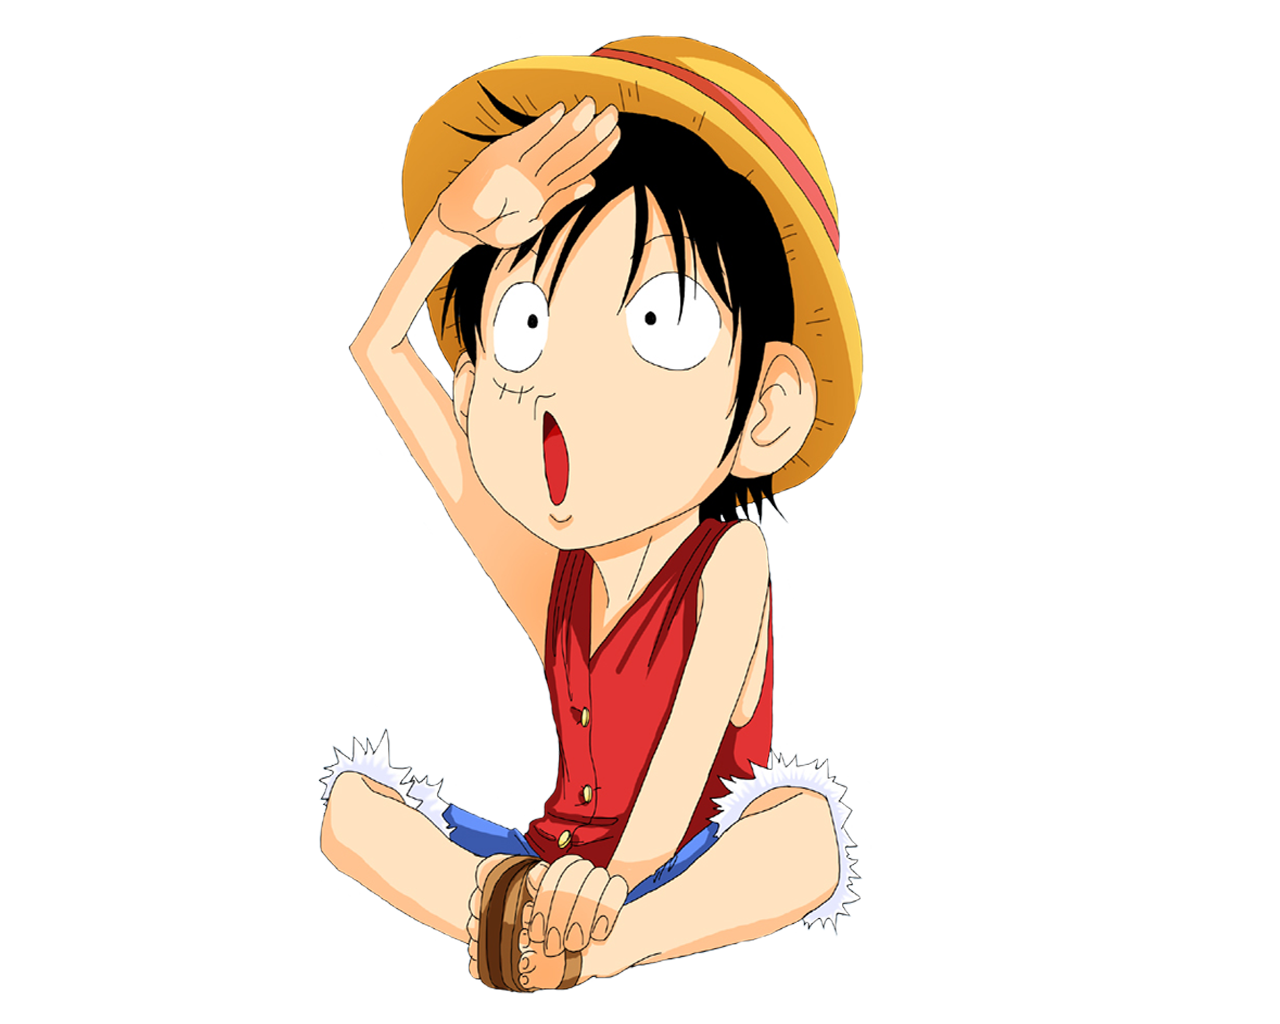 Download One Piece Luffy Image HQ PNG Image  FreePNGImg